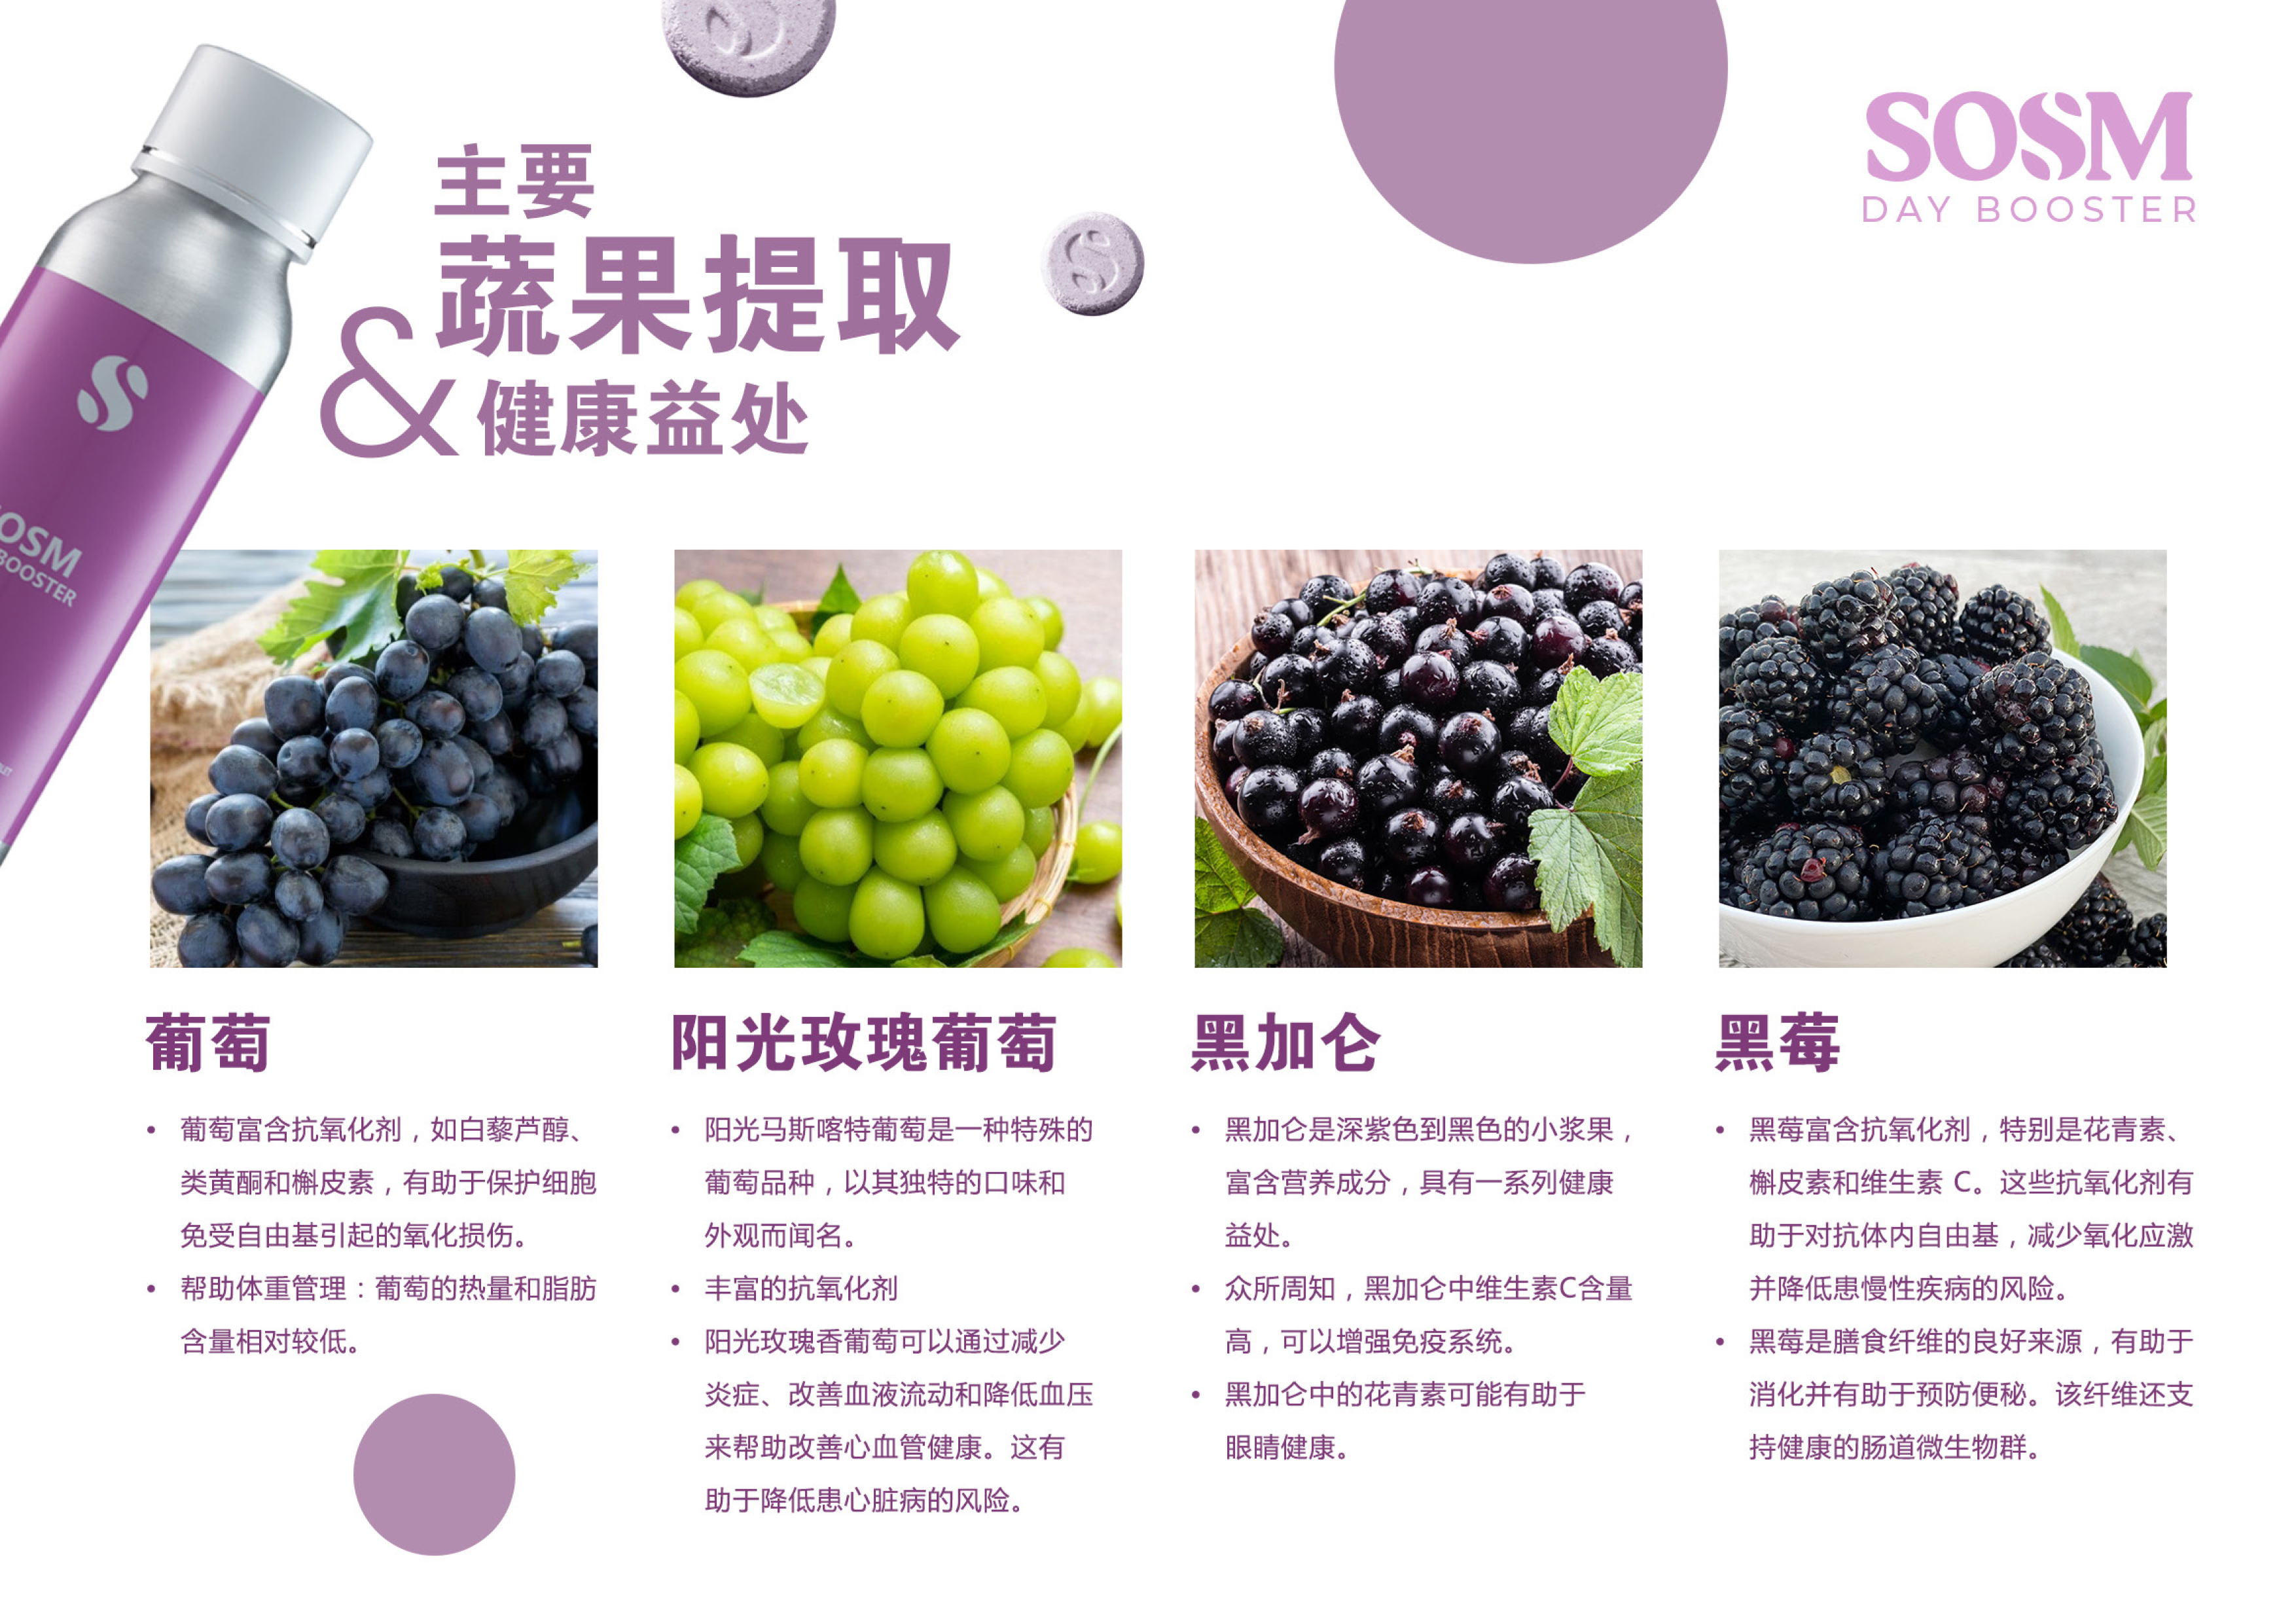 SOMS Day Booster  - ingredients - grape blackberry